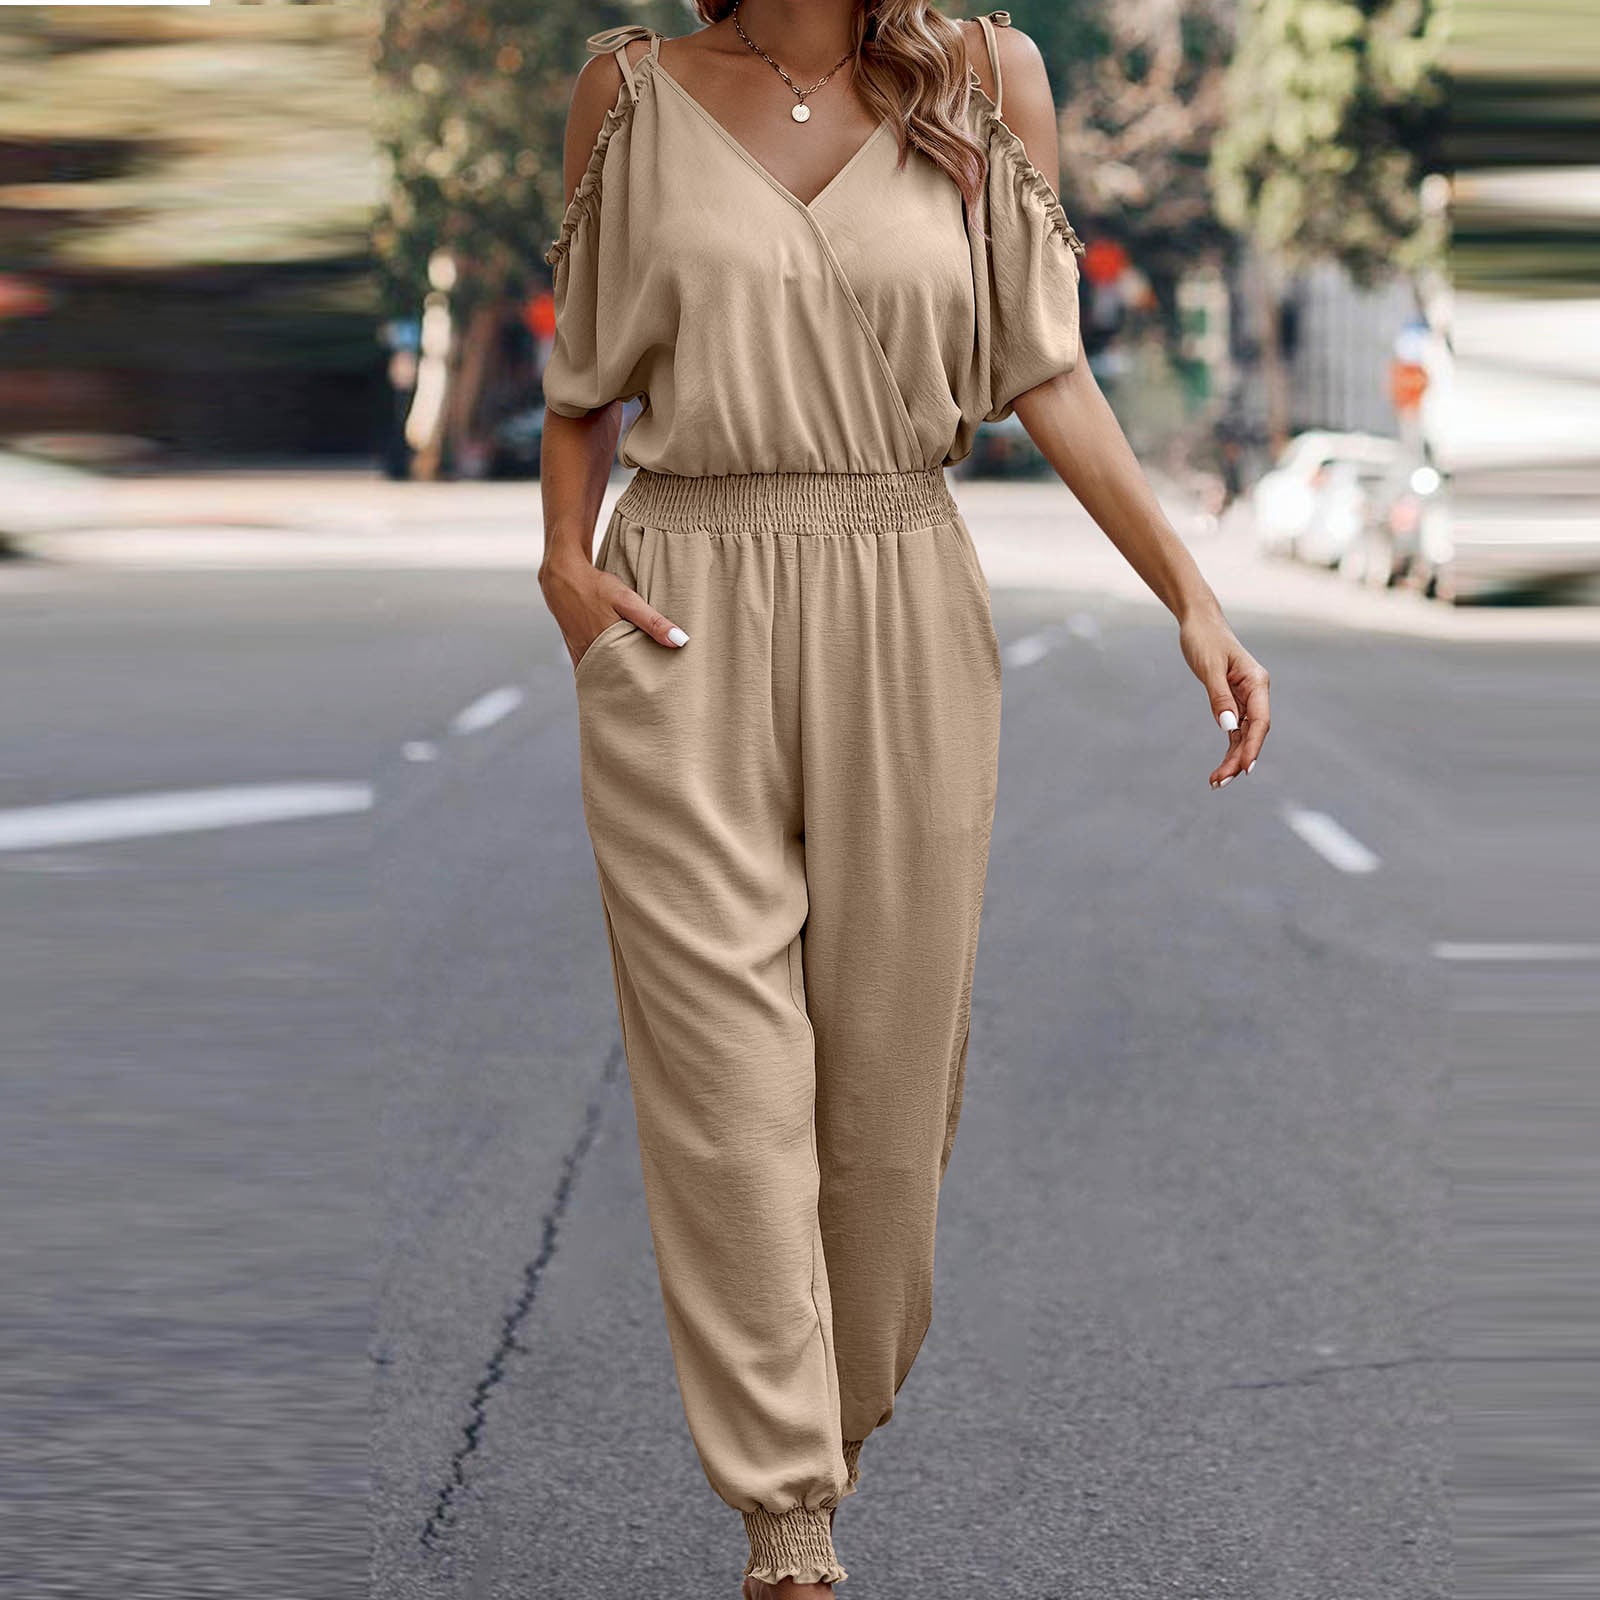 qolati Jumpsuit for Women Casual Loose Spaghetti Strap Long Pants Rompers  Sexy Ruffle Cold Shoulder Summer One-Piece Outfits 